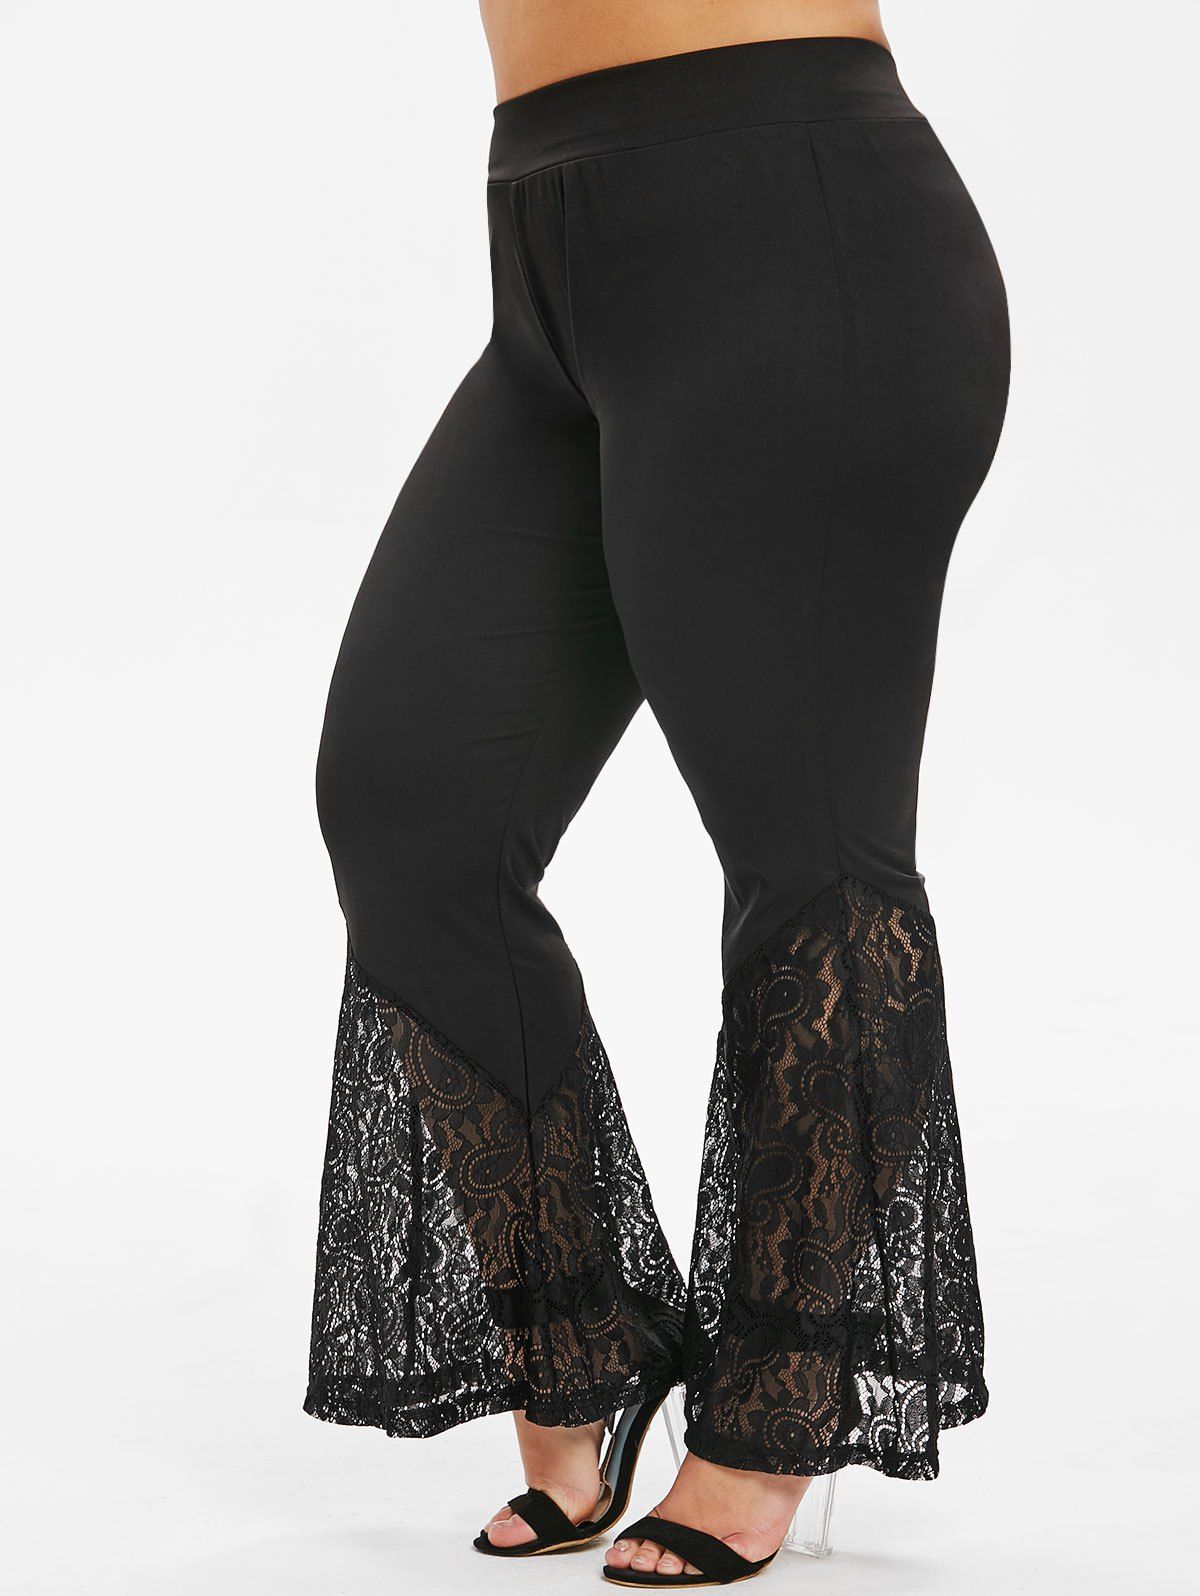 [35% OFF] 2021 Plus Size Lace Insert Bell Bottoms Pants In BLACK ...